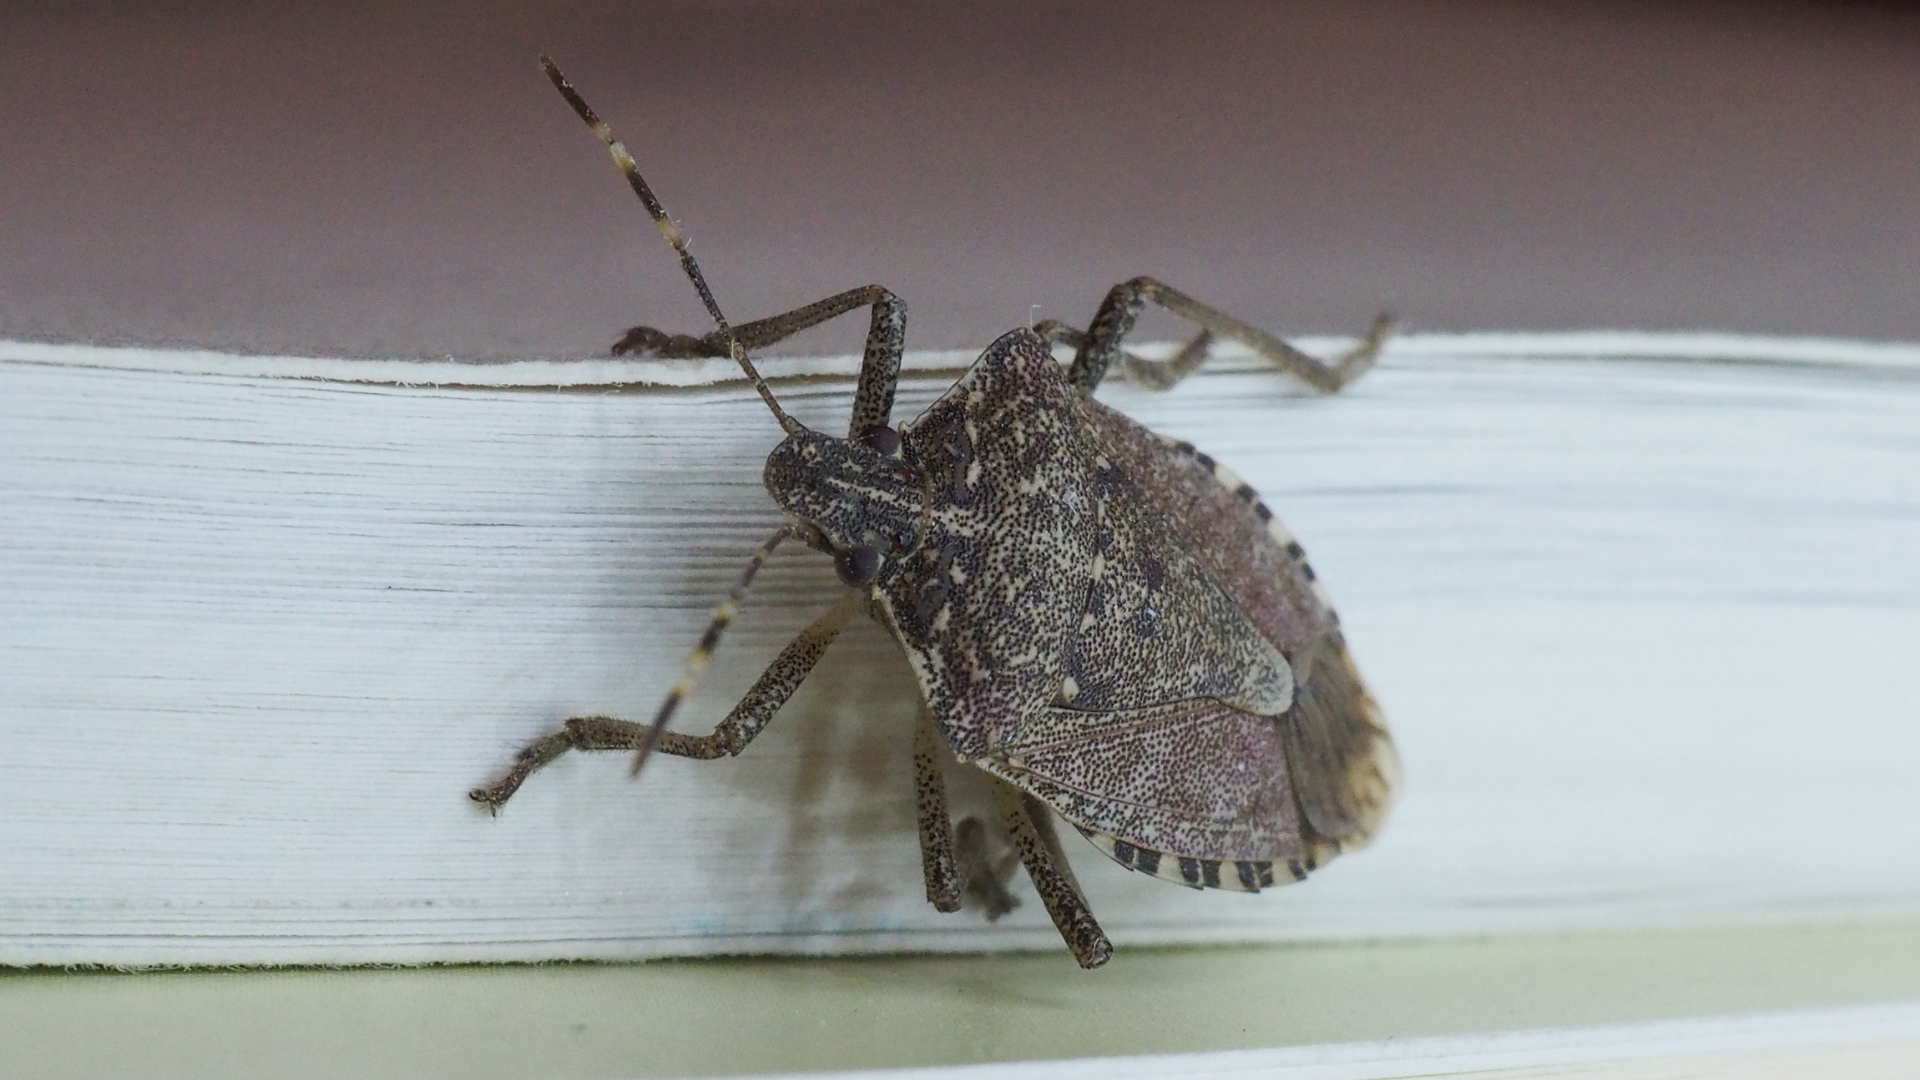 stink bugs are more than just a nuisance